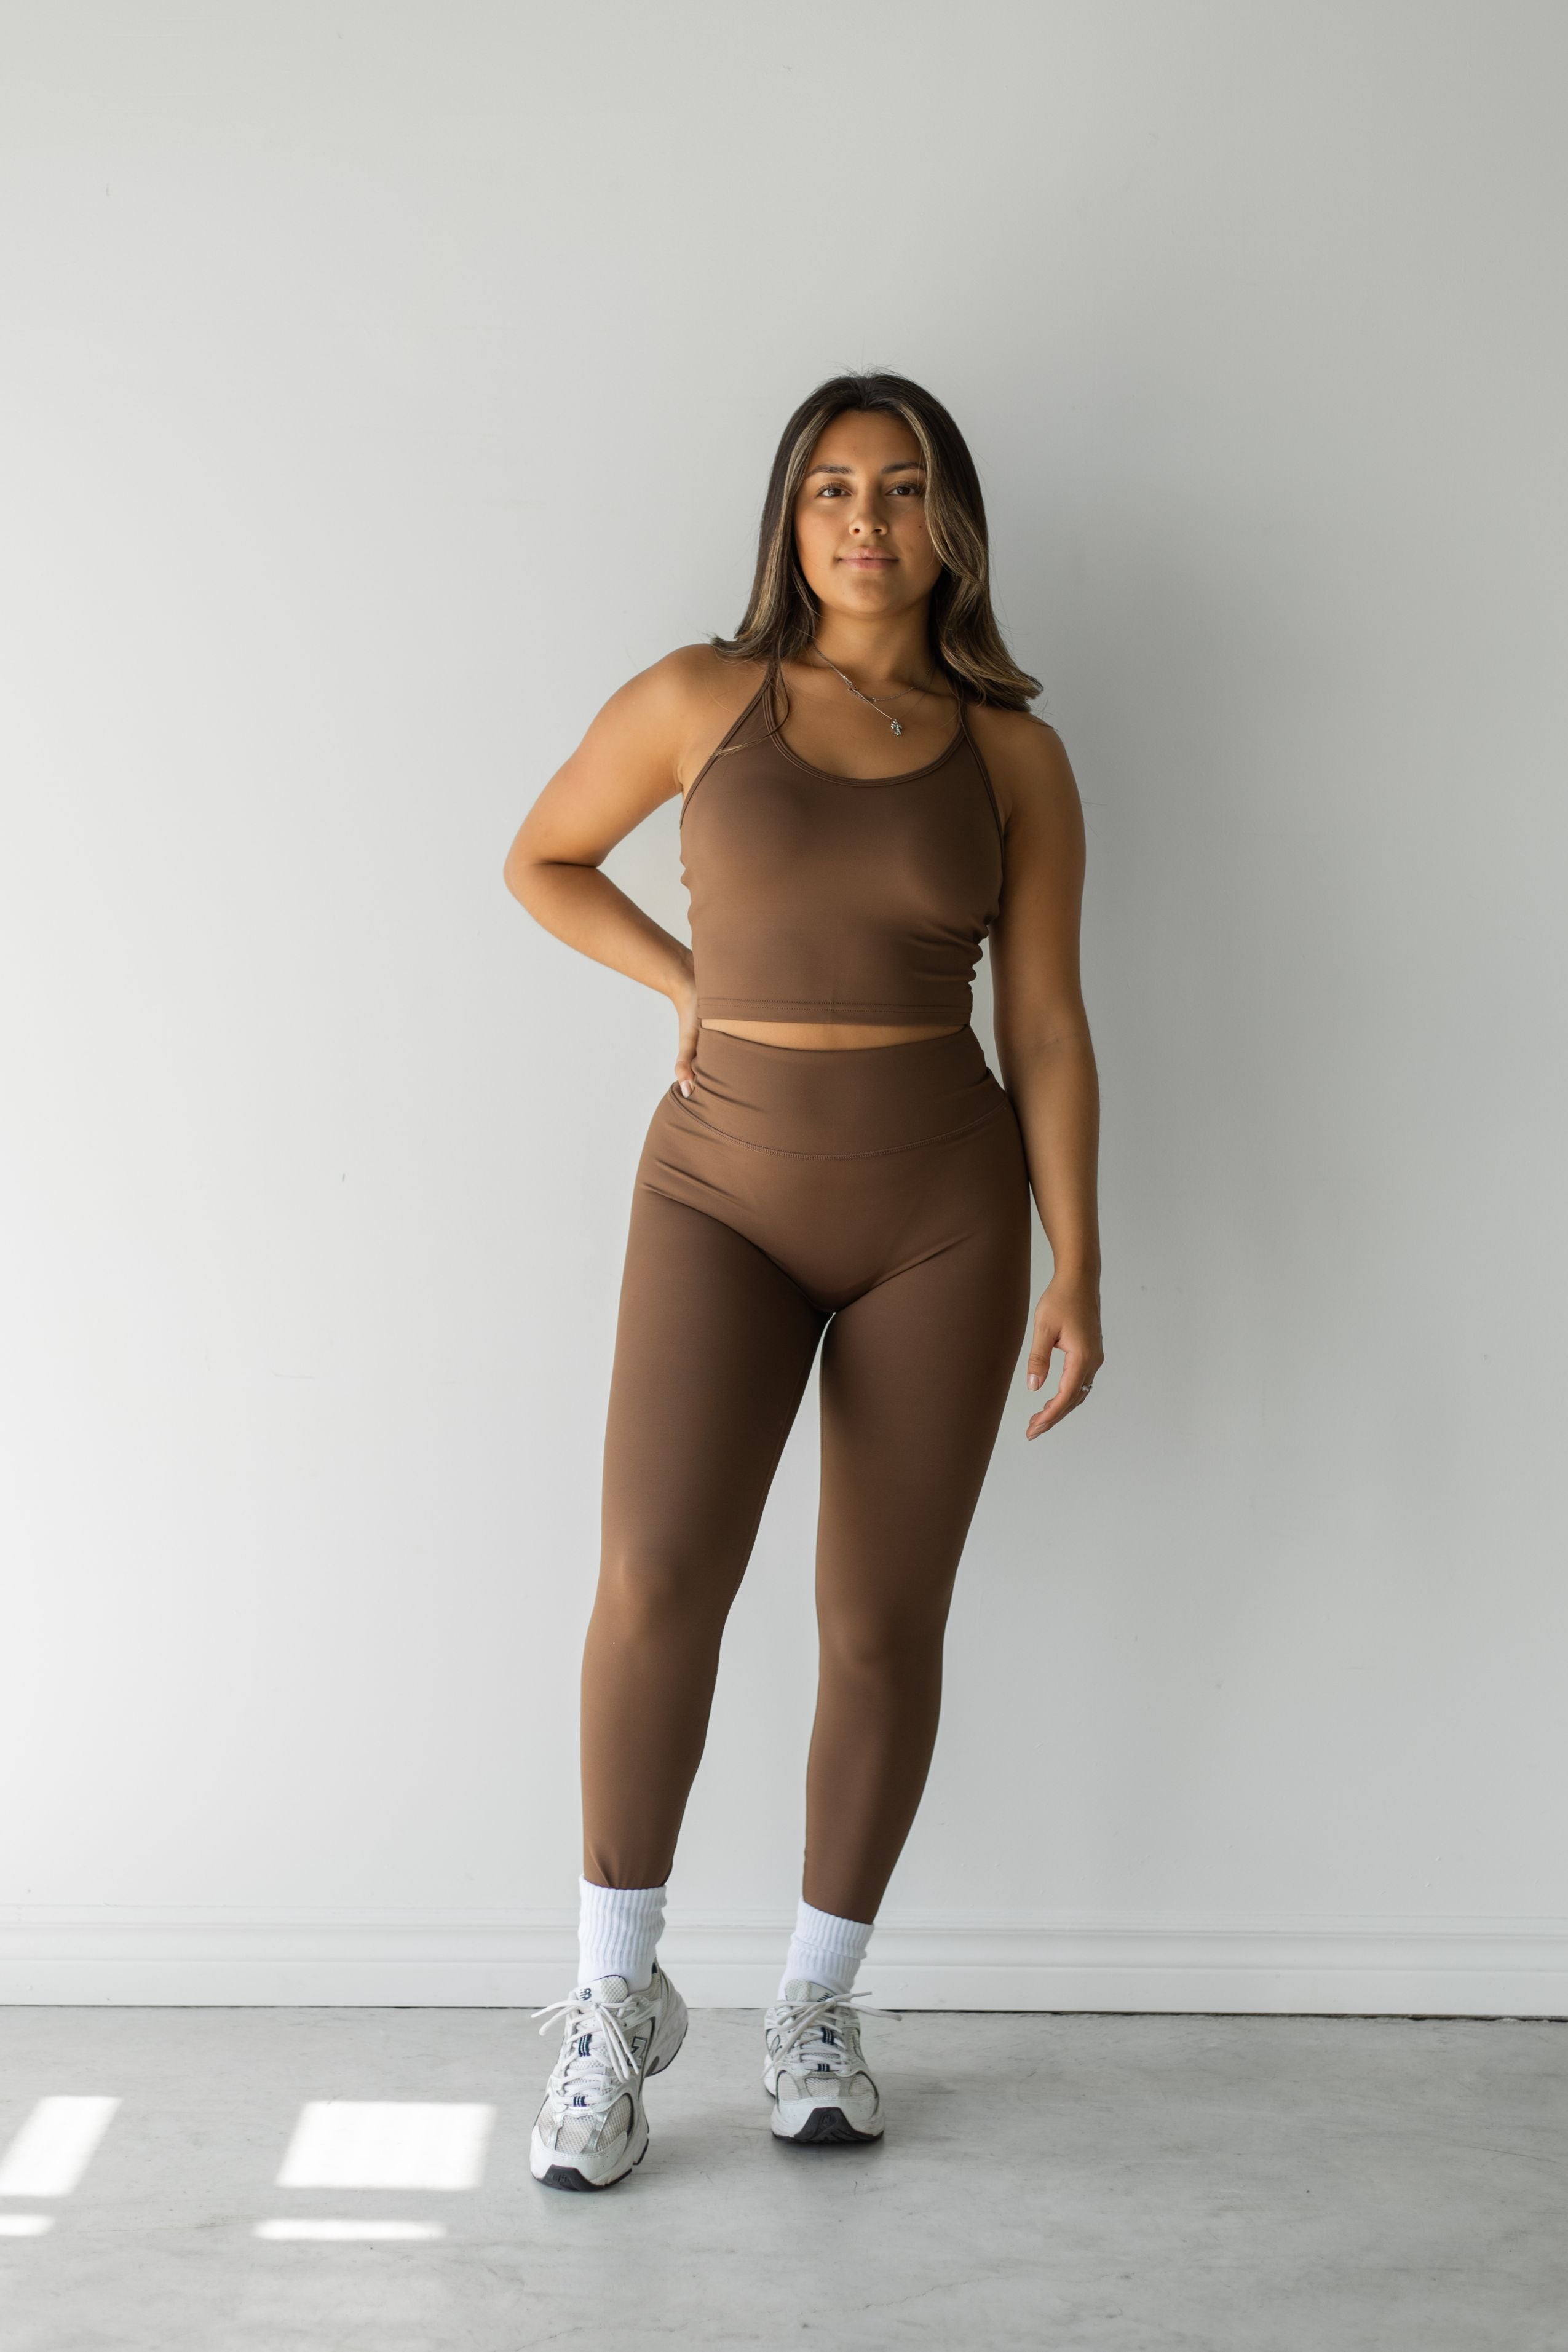 HZ.BEHAVE Leggings for Womens High Waist Cut Out Criss Cross Lace Up  Leggings (Size : S) : Buy Online at Best Price in KSA - Souq is now  : Fashion